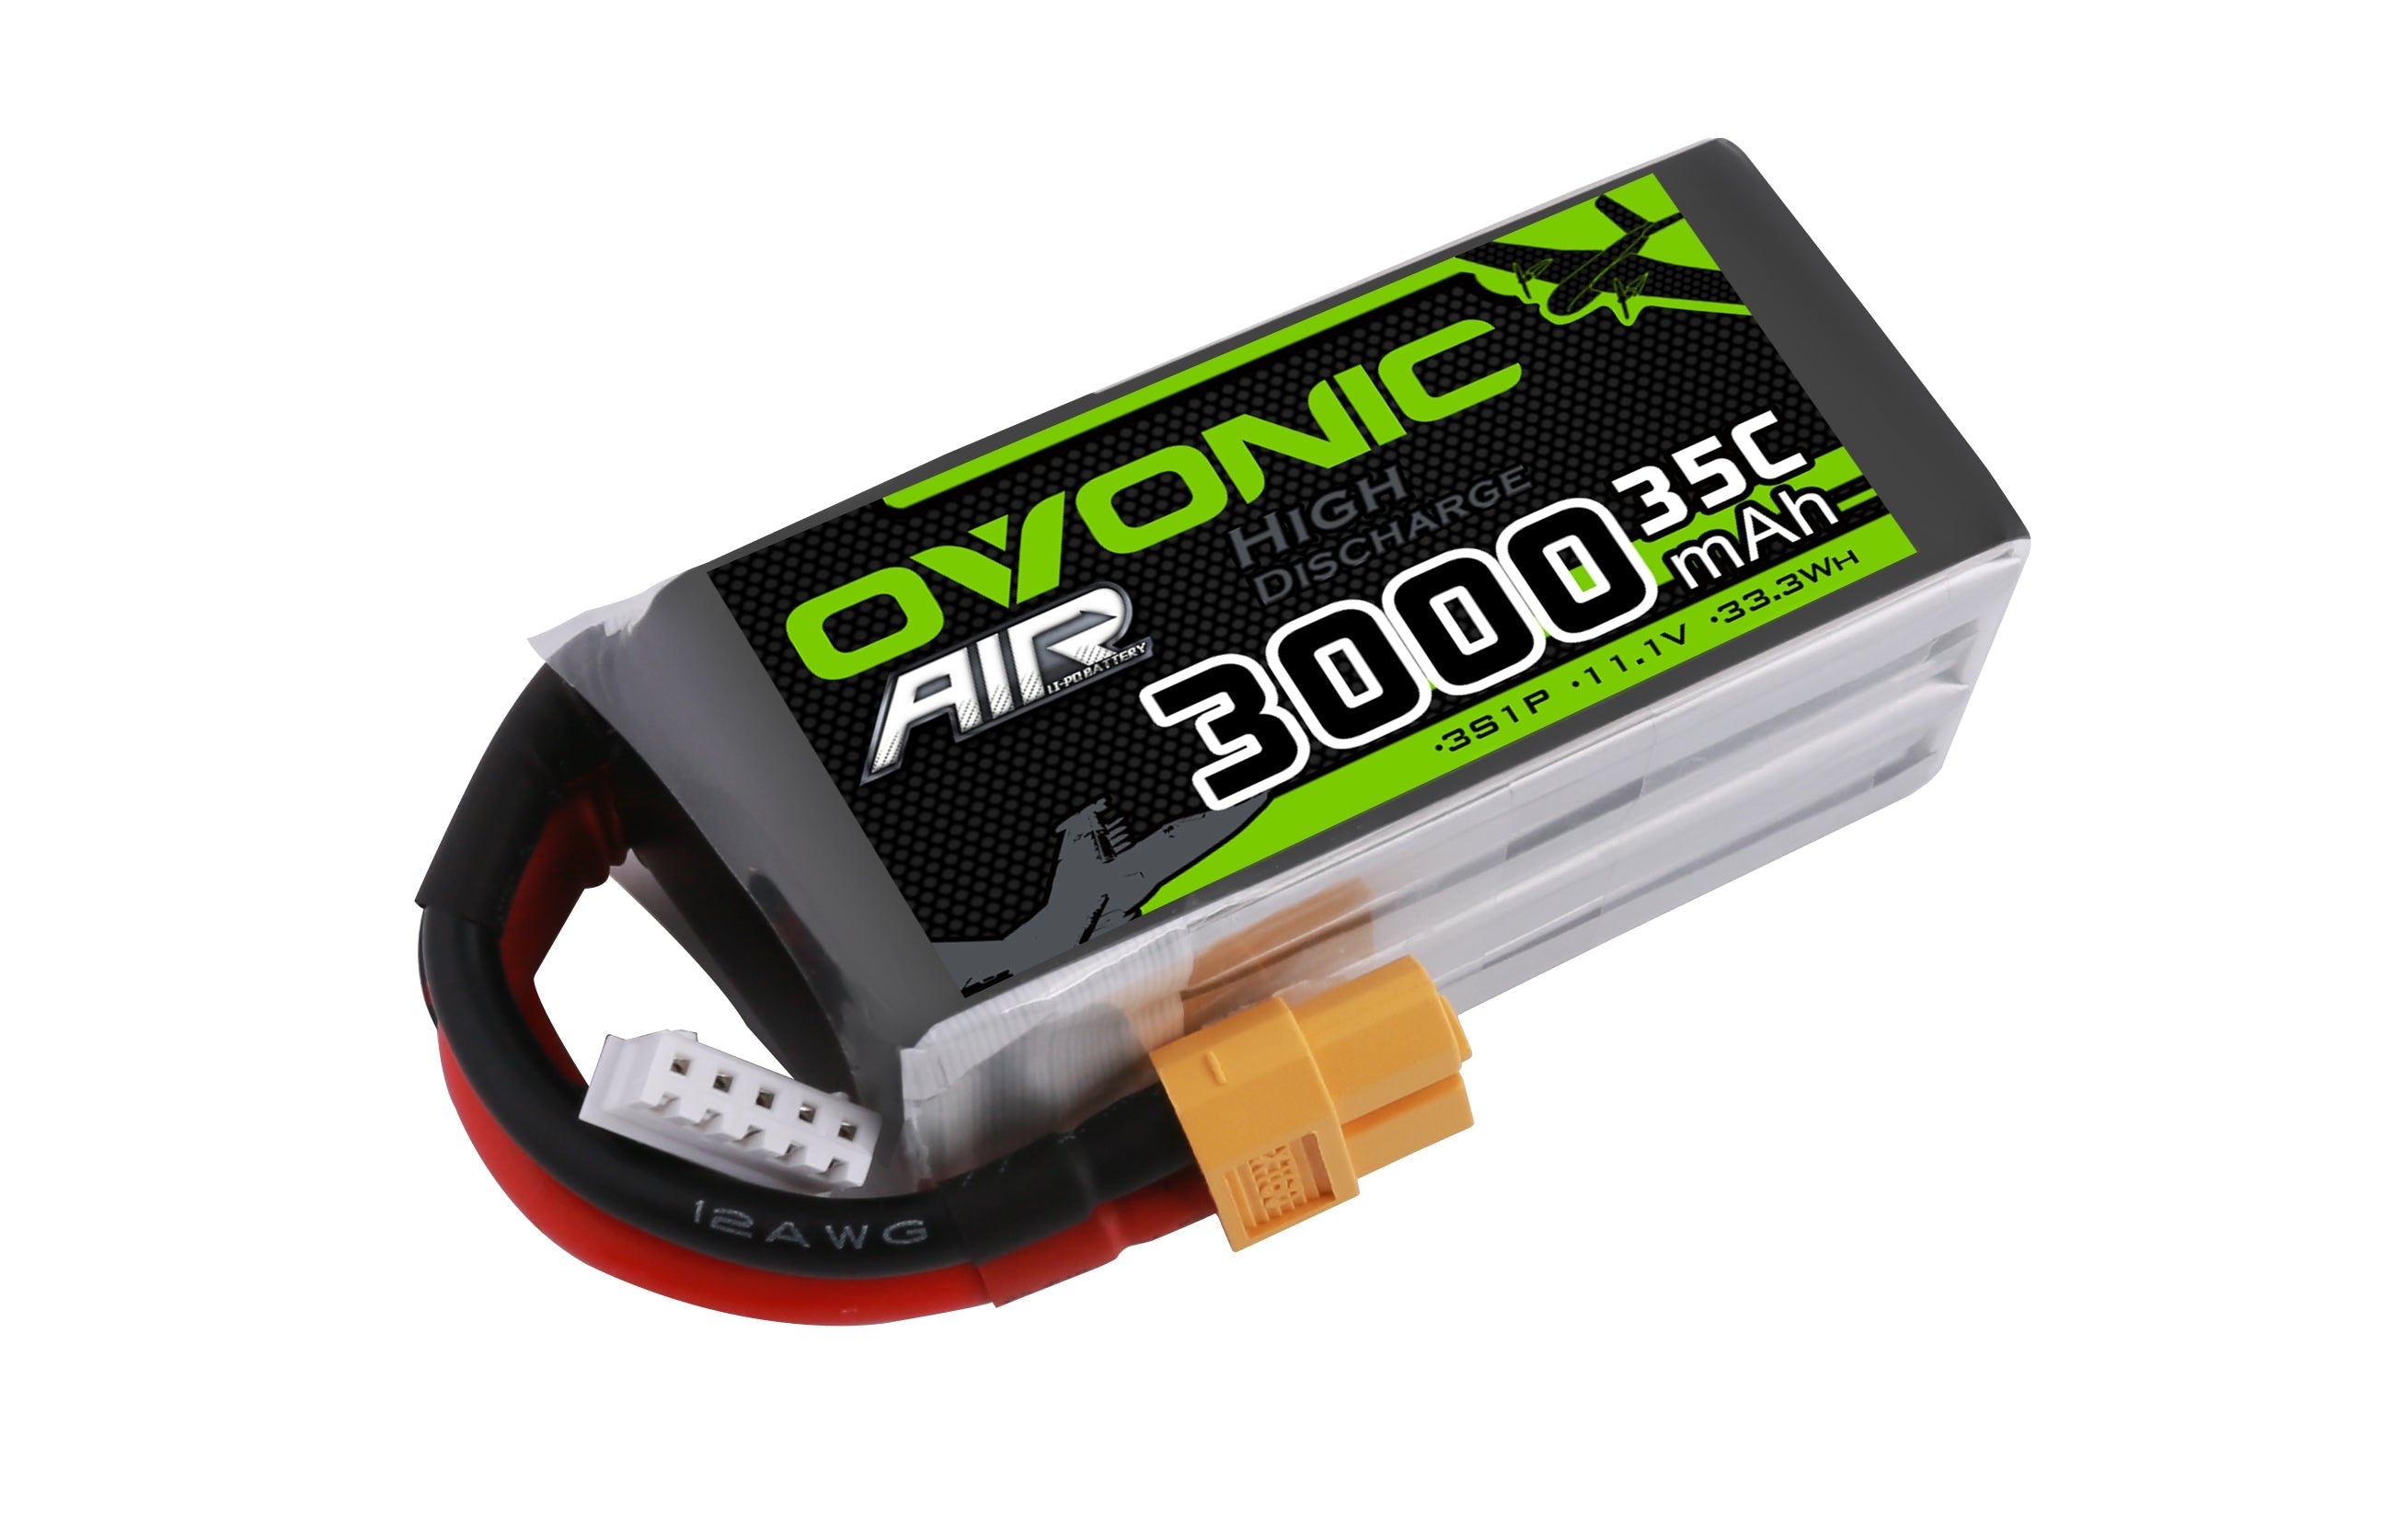 Ovonic 3000mAh 3S1p 11.1V 35C Lipo Battery Pack with XT60 Plug for RC Airplane - Ampow